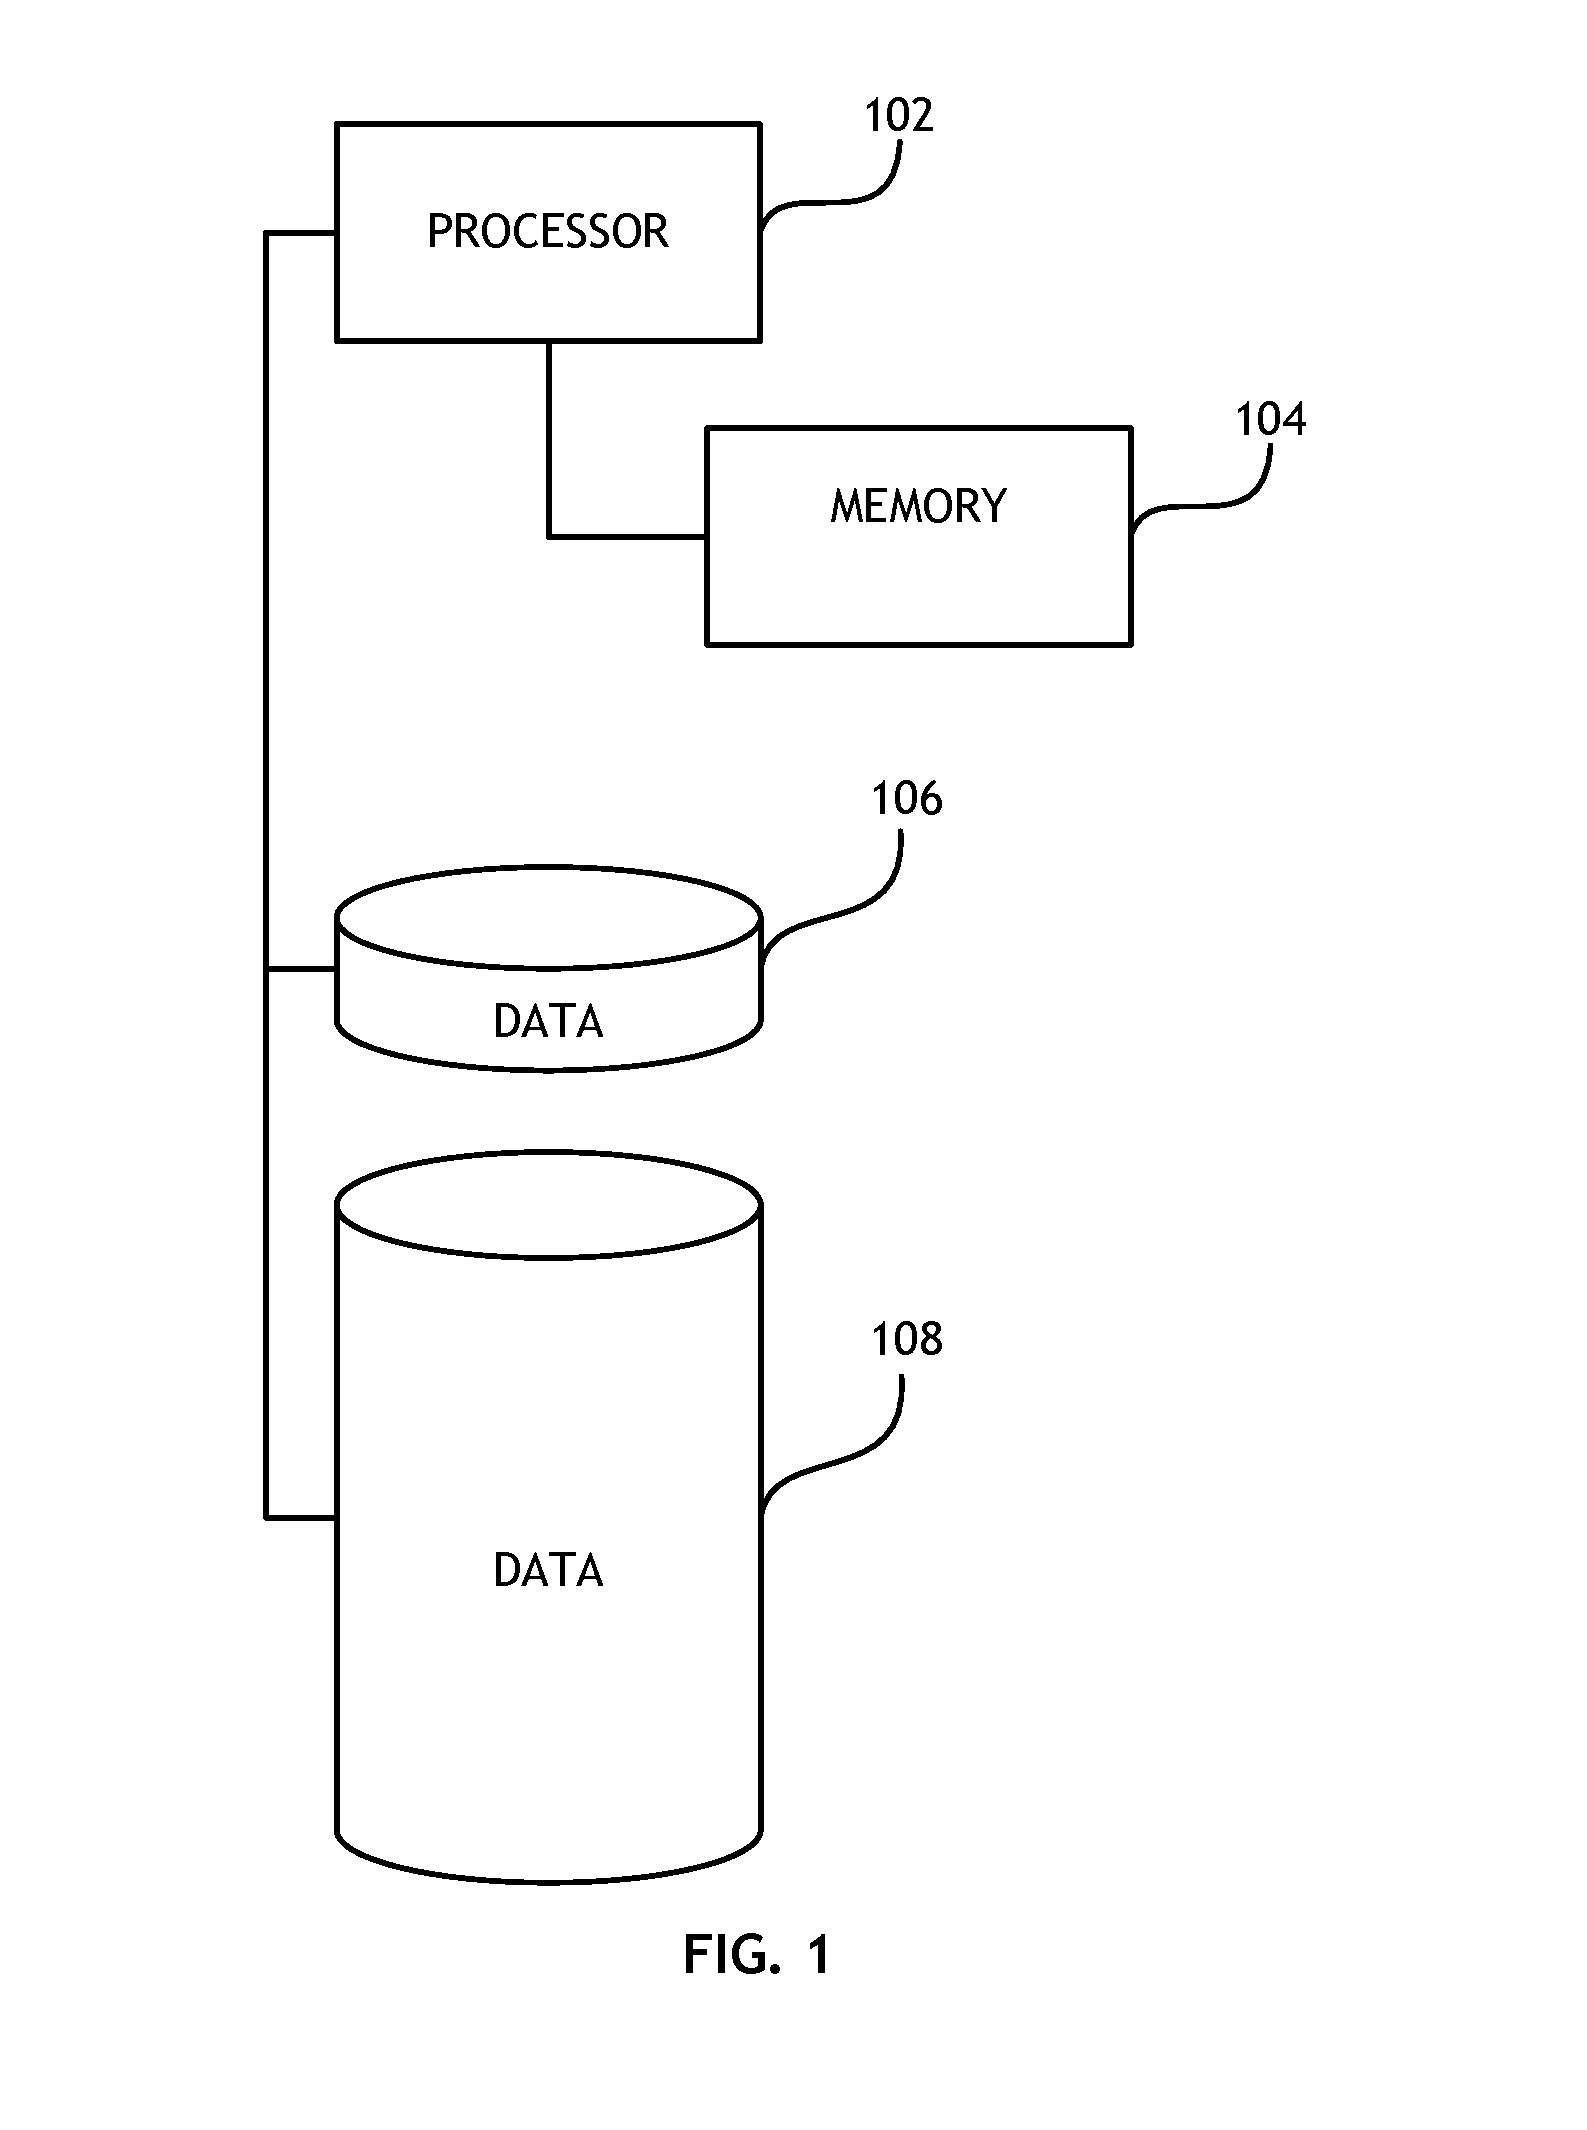 Apparatus to manage efficient data migration between tiers